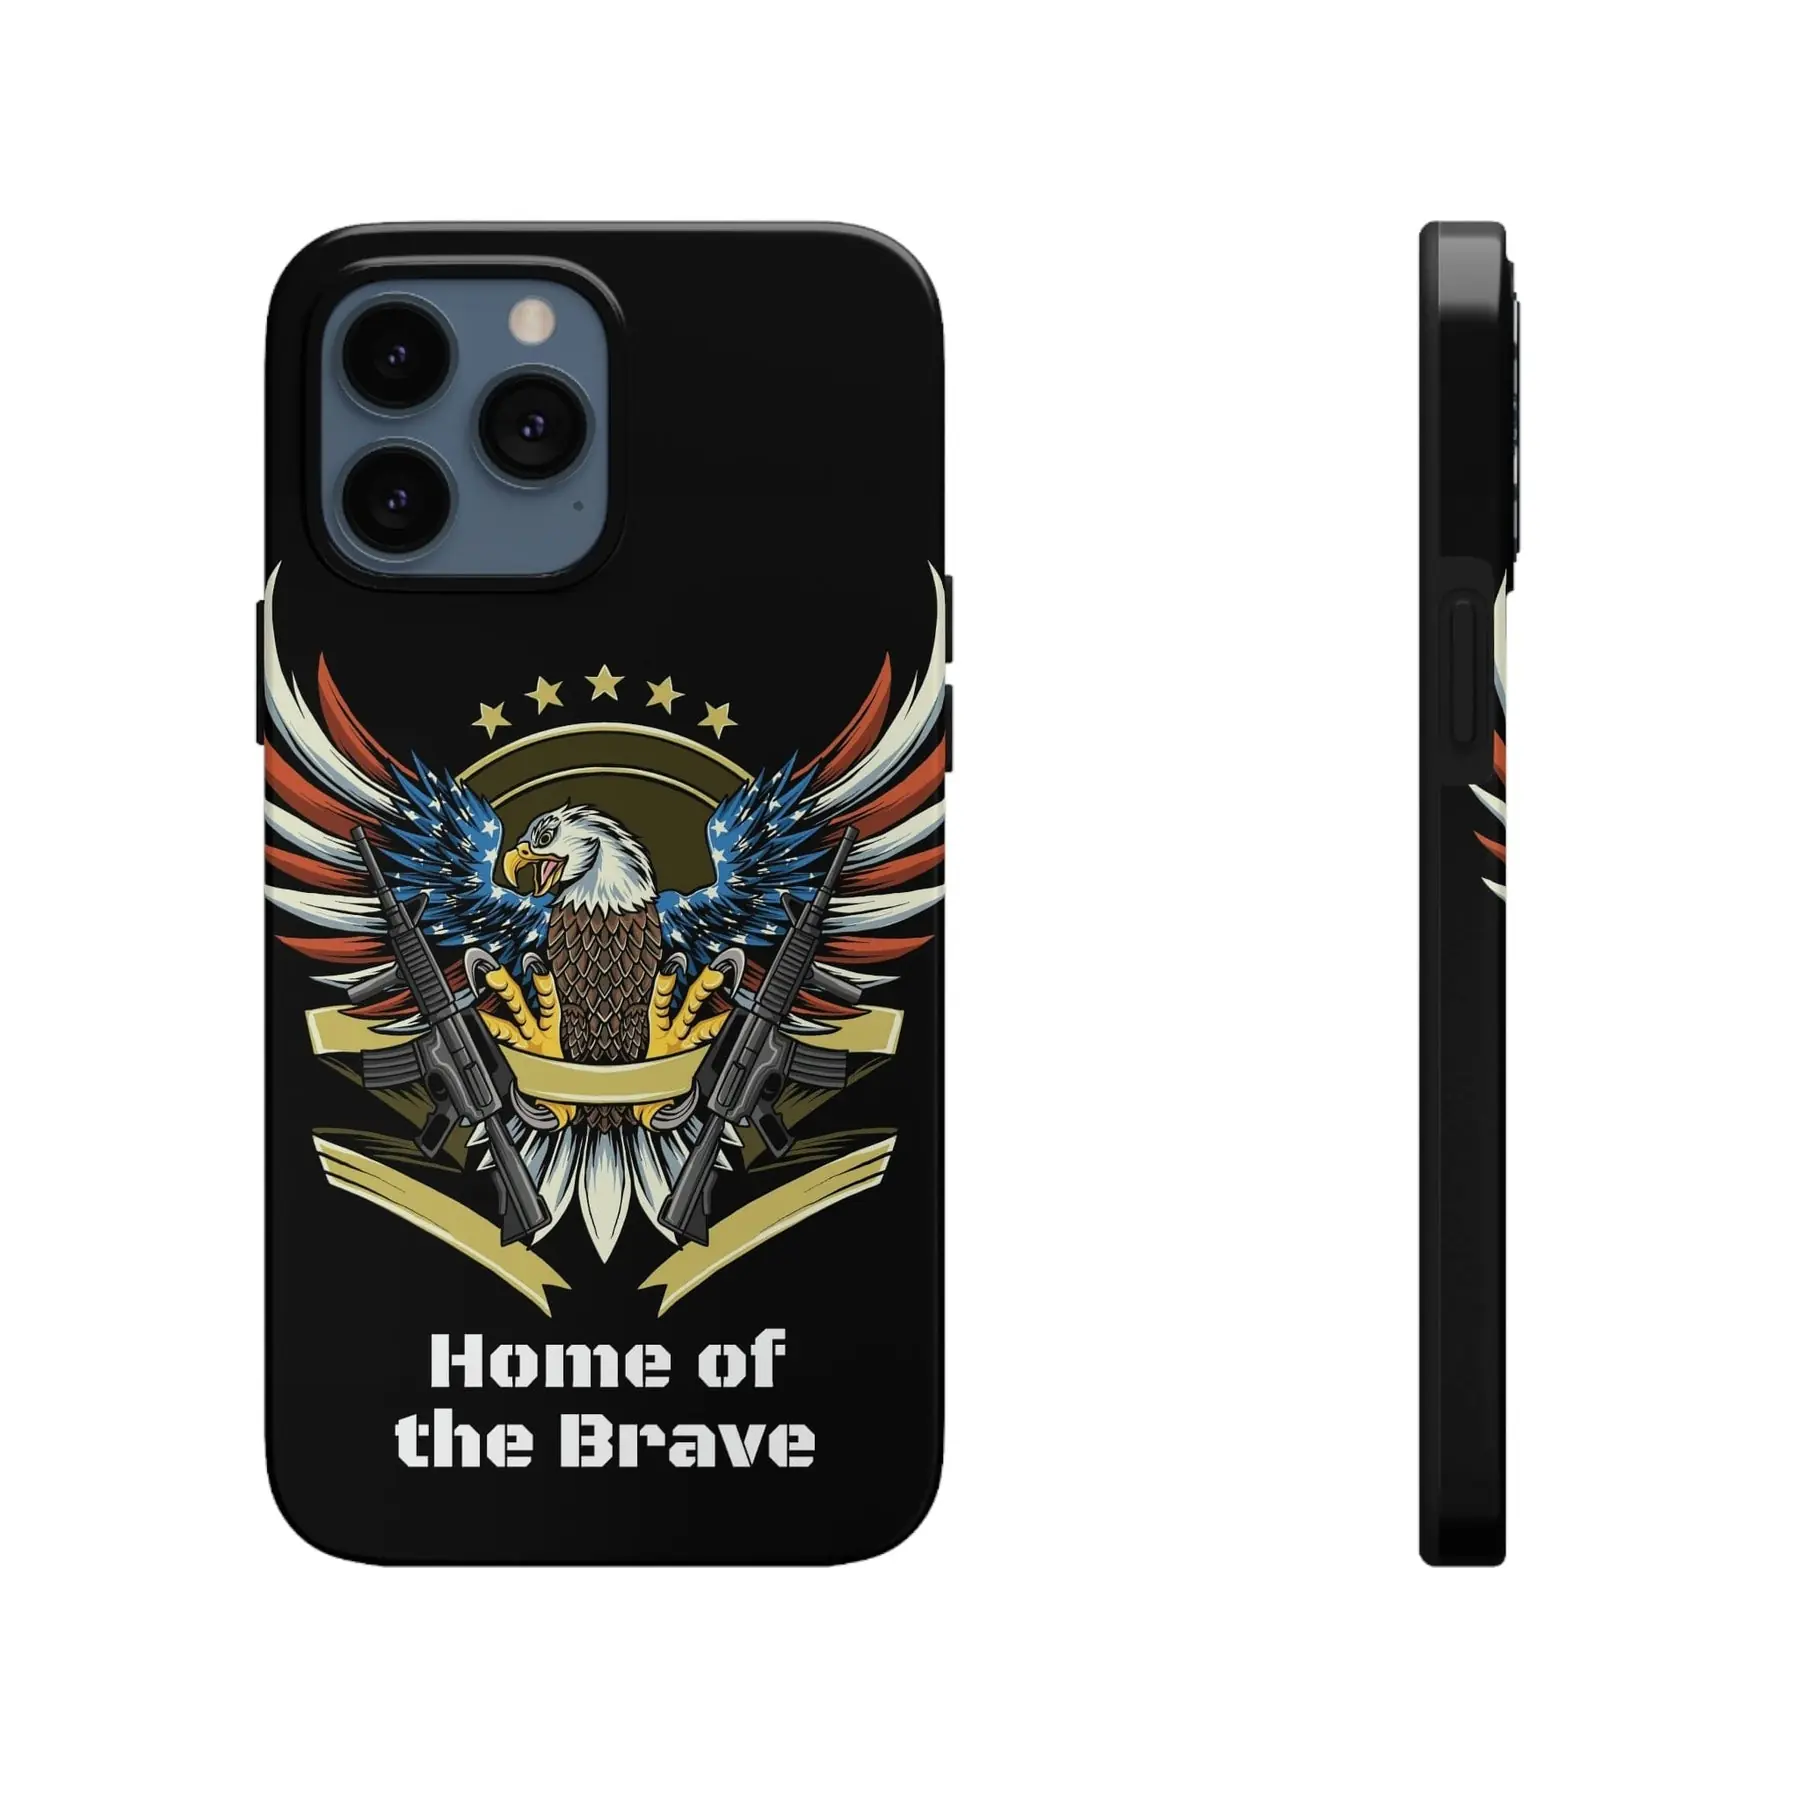 IPhone 14, 13, 12 Series Tough TitanGuard By Case-Mate® - Home of the Brave